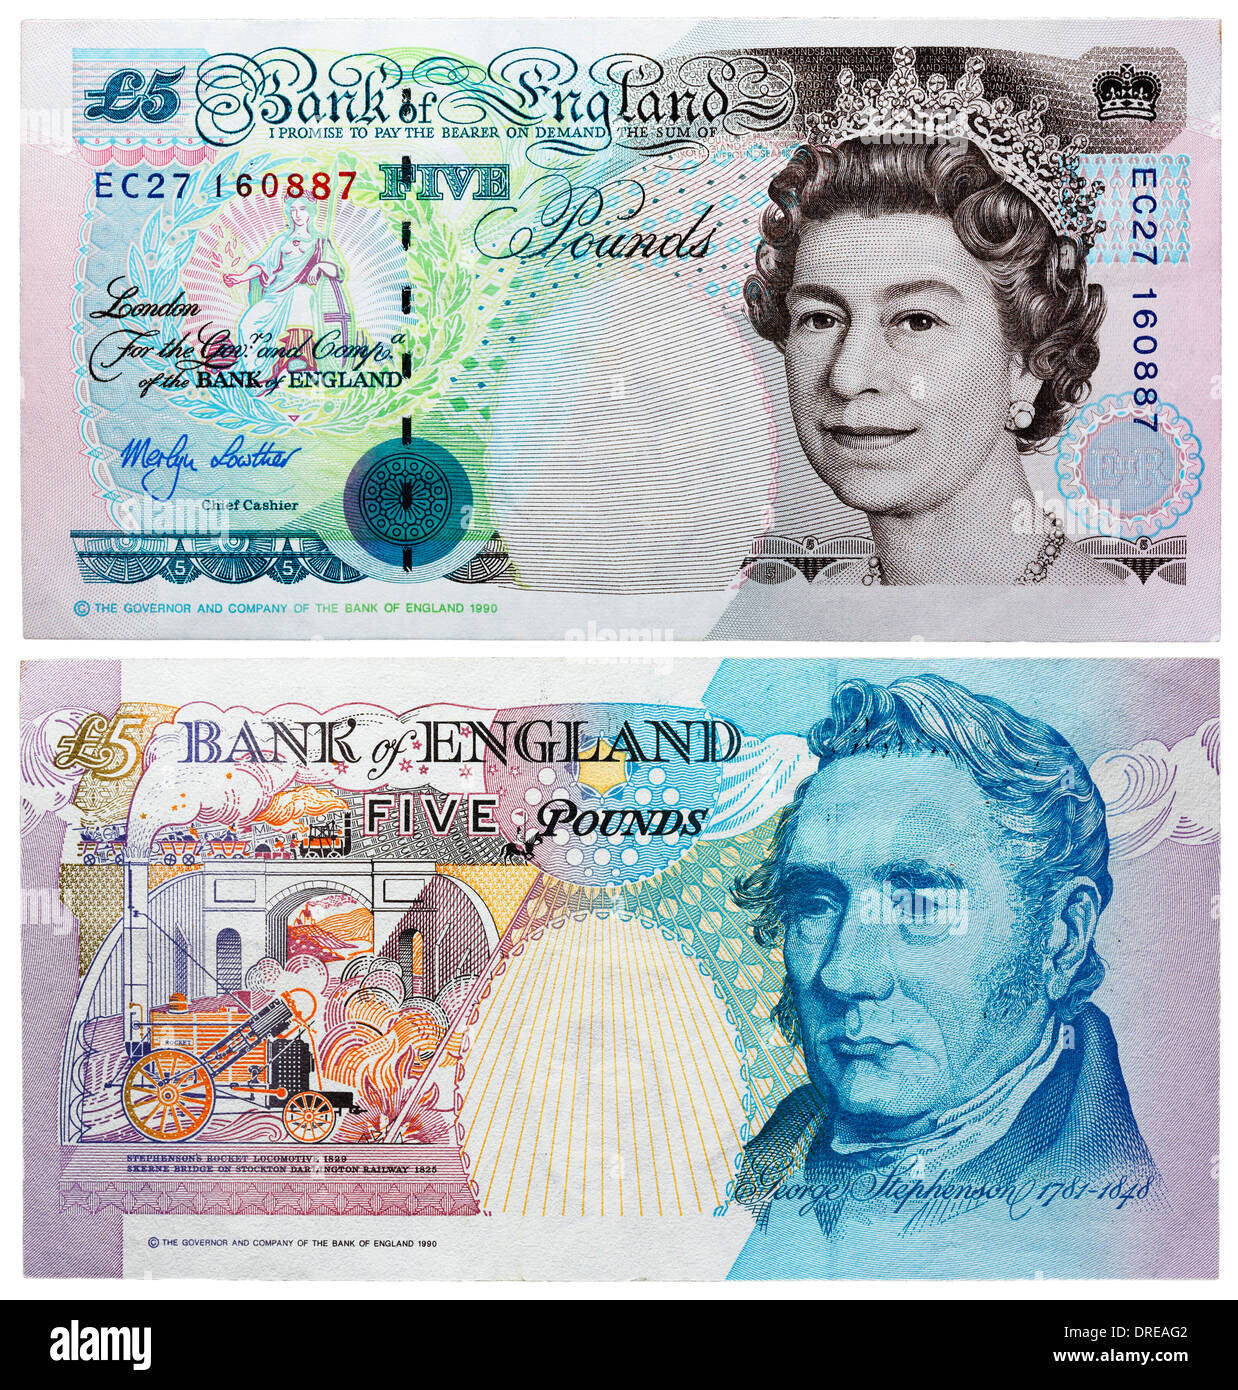 https://c8.alamy.com/comp/DREAG2/5-pounds-banknote-queen-elizabeth-ii-and-george-stephenson-uk-1999-DREAG2.jpg